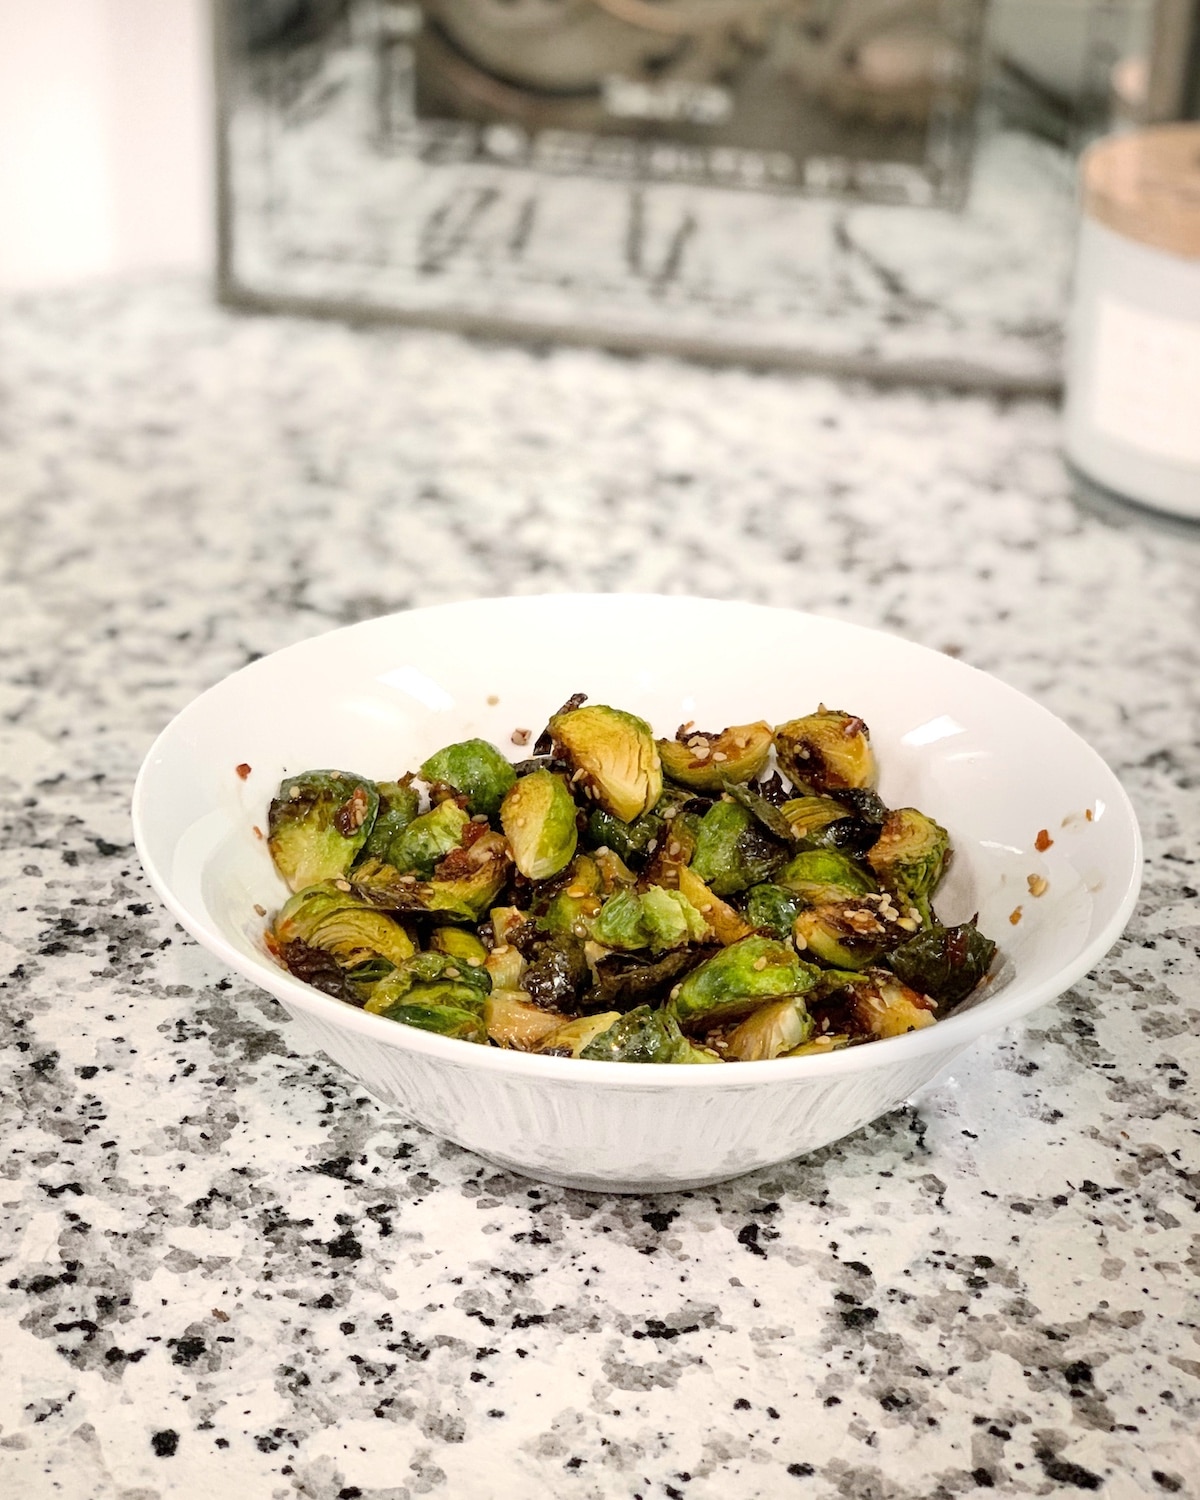 Asian maple glazed brussel sprouts in a white bowl on a marble counter.